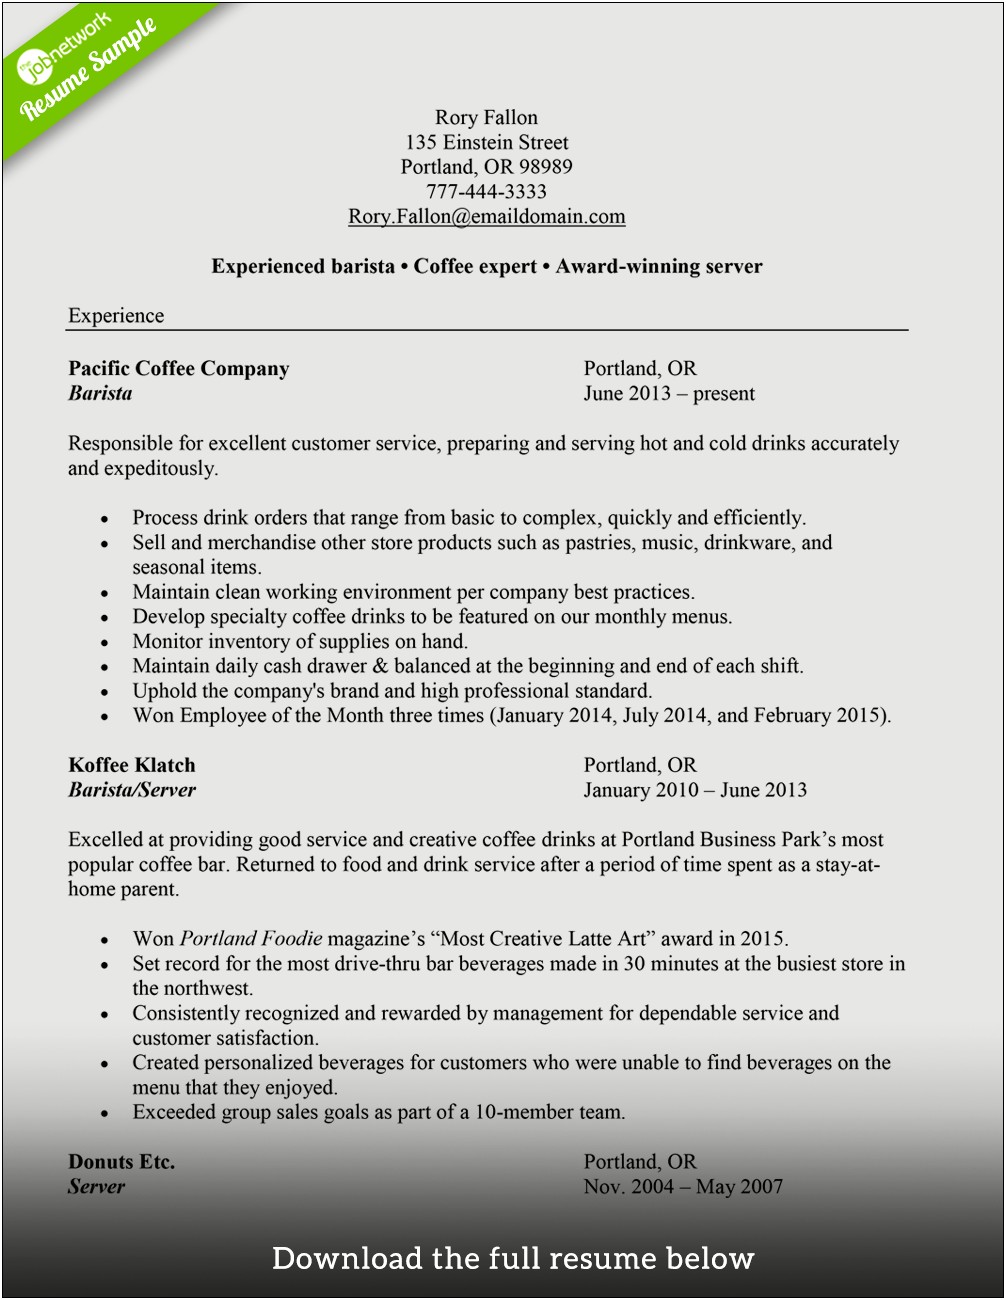 Resume Objective For A Barista